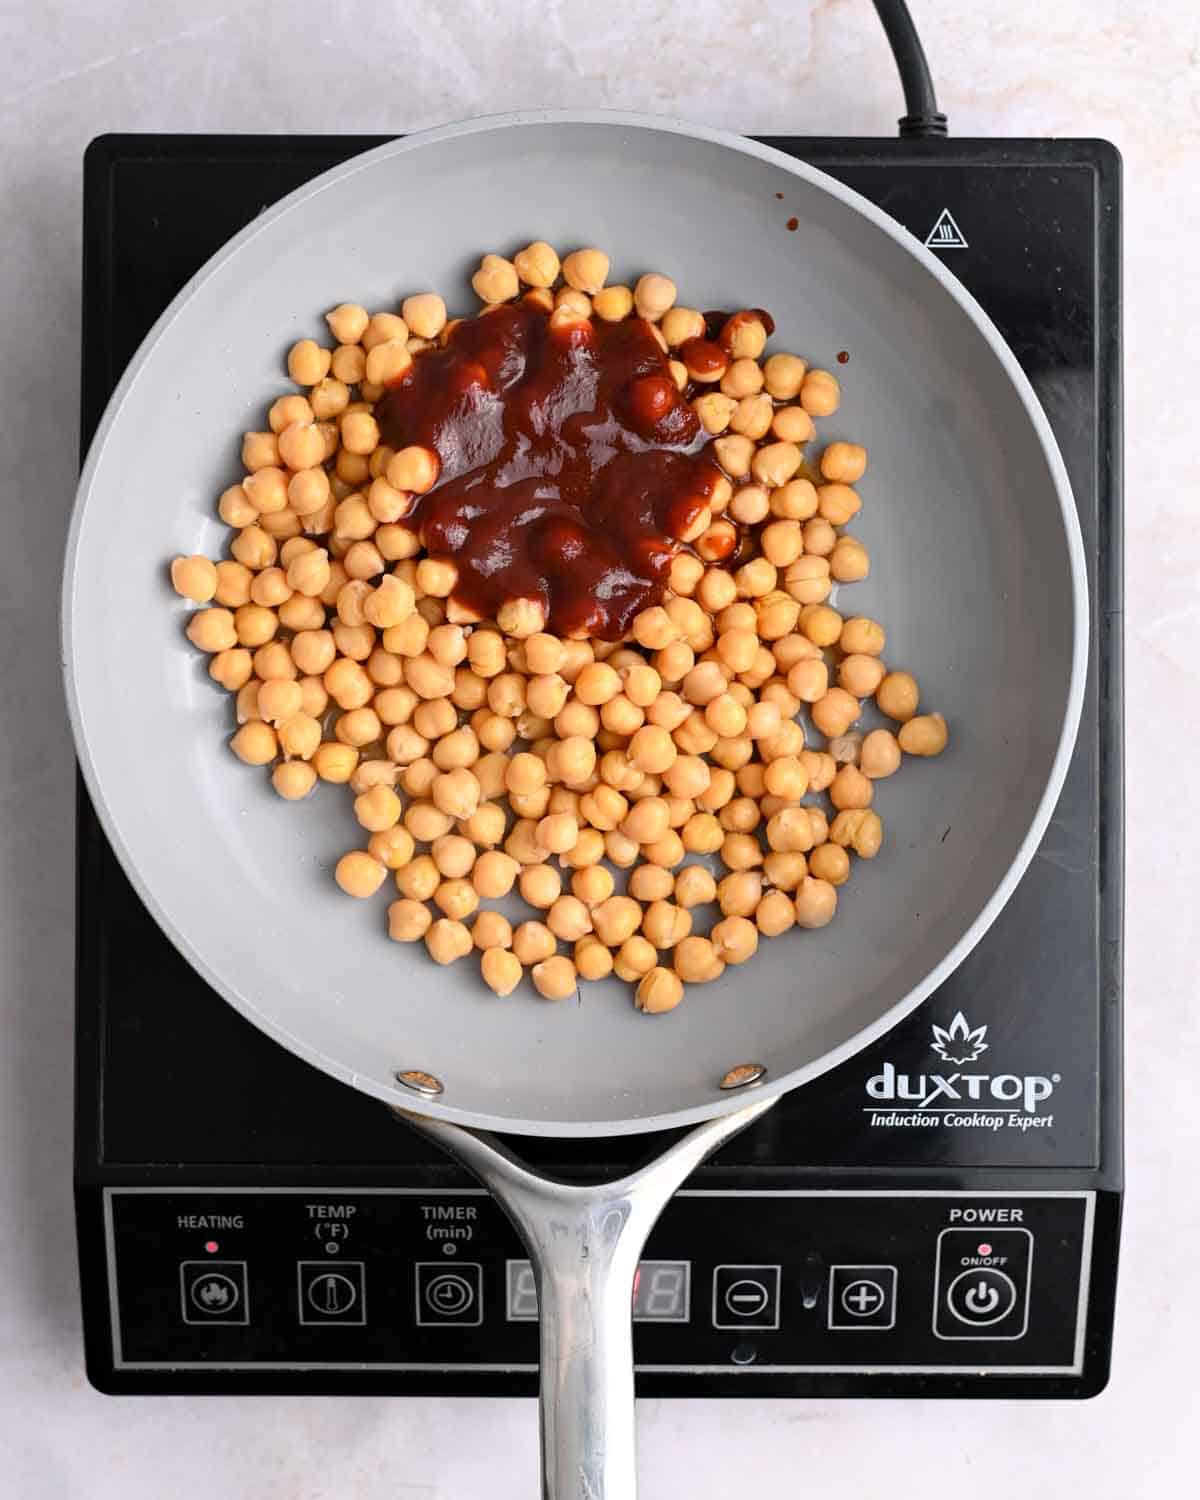 Chickpeas and BBQ sauce in a skillet on an induction stove.